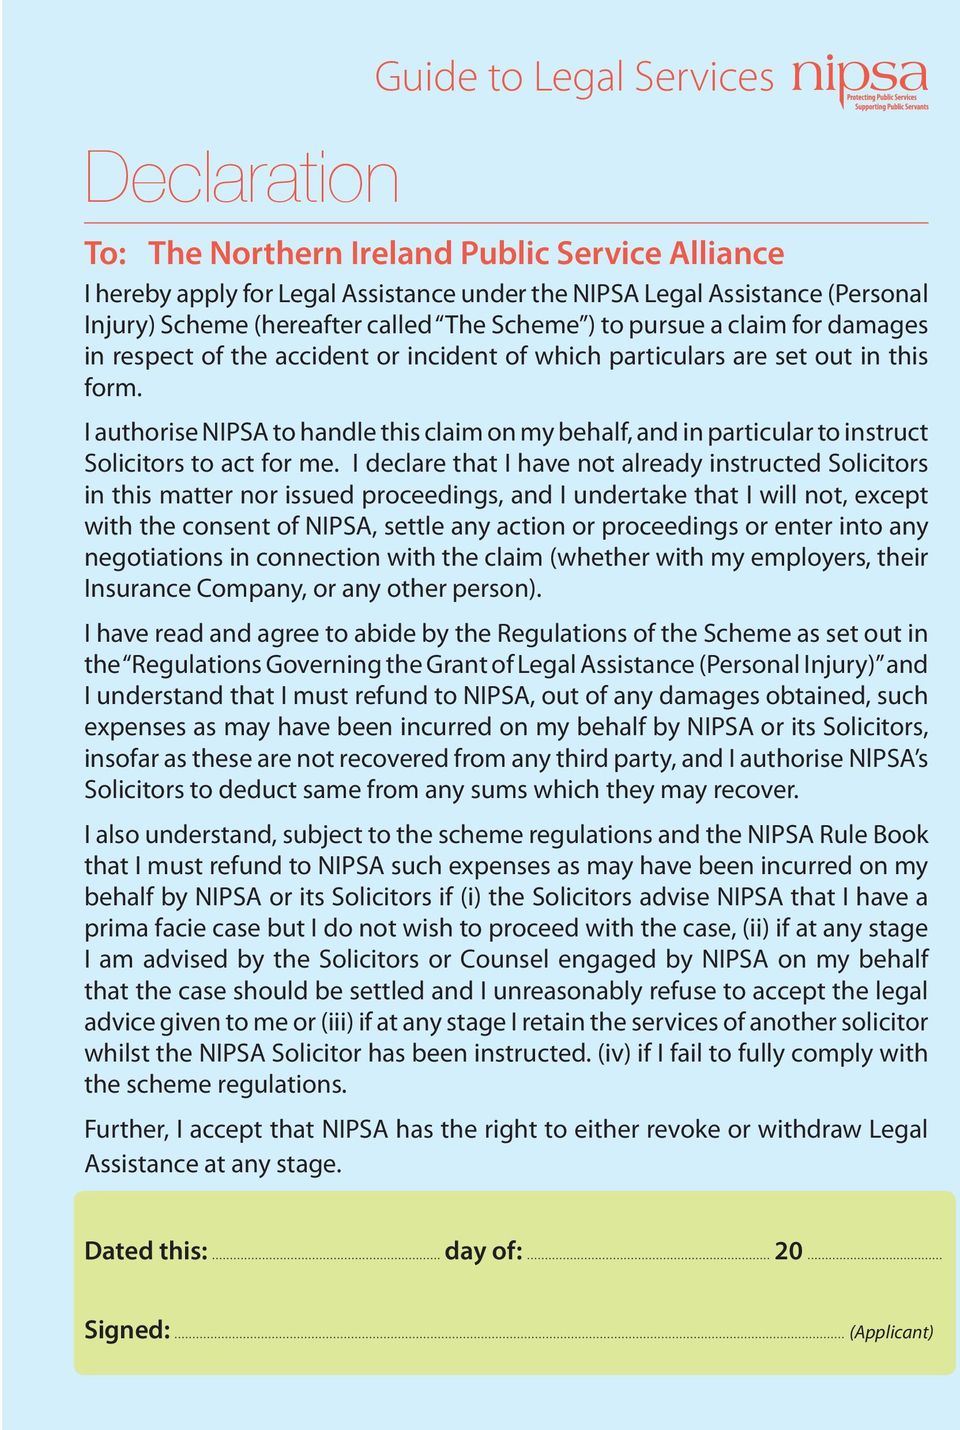 I authorise NIPSA to handle this claim on my behalf, and in particular to instruct Solicitors to act for me.